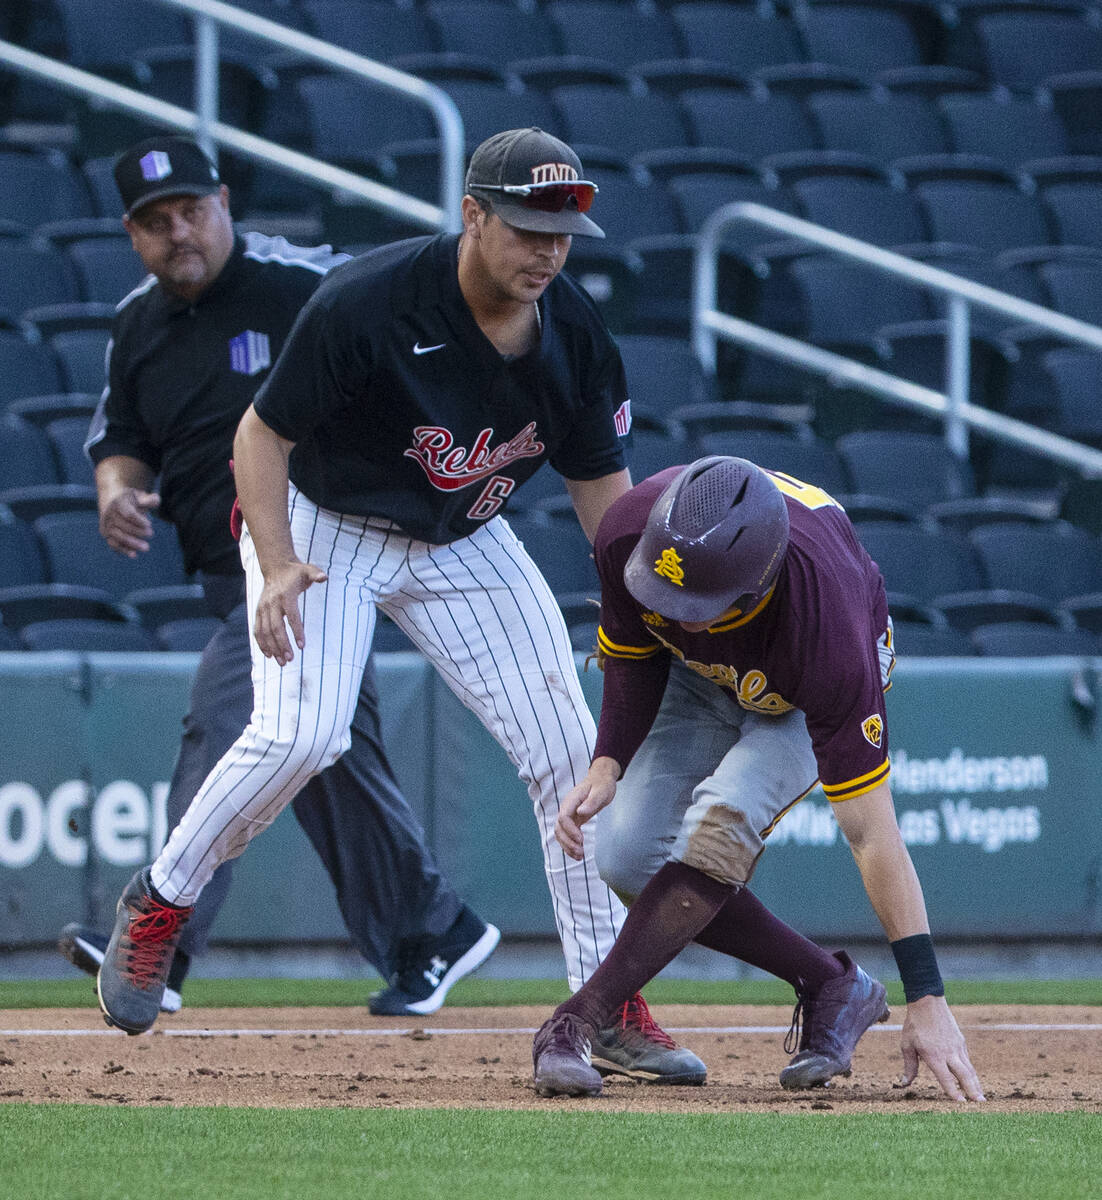 Arizona St. outfielder Joe Lampe (5) is tagged out by UNLV infielder Diego Alarcon (6) at third ...